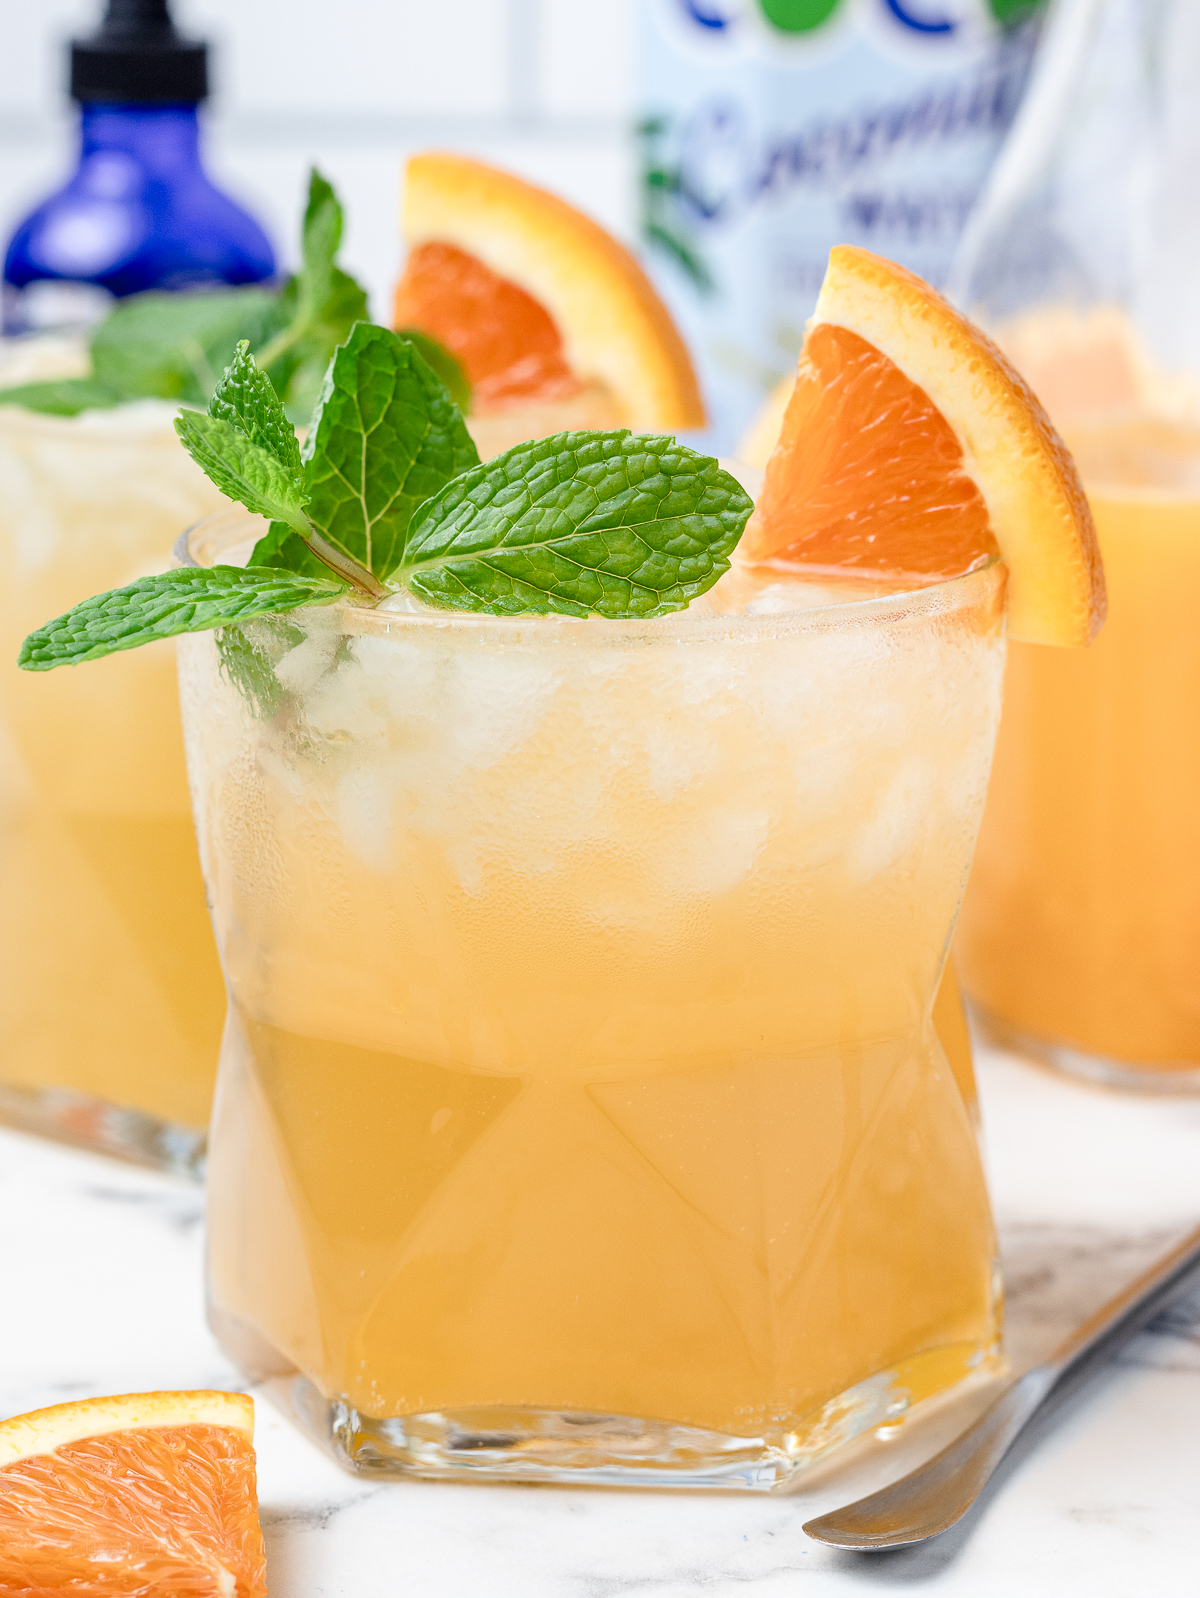 An iced Orange Coconut Water Mocktail with fresh mint and orange slices. They are a light and refreshing orange color. There is freshly squeezed orange juice, alcohol free orange bitters, and coconut water in the background.